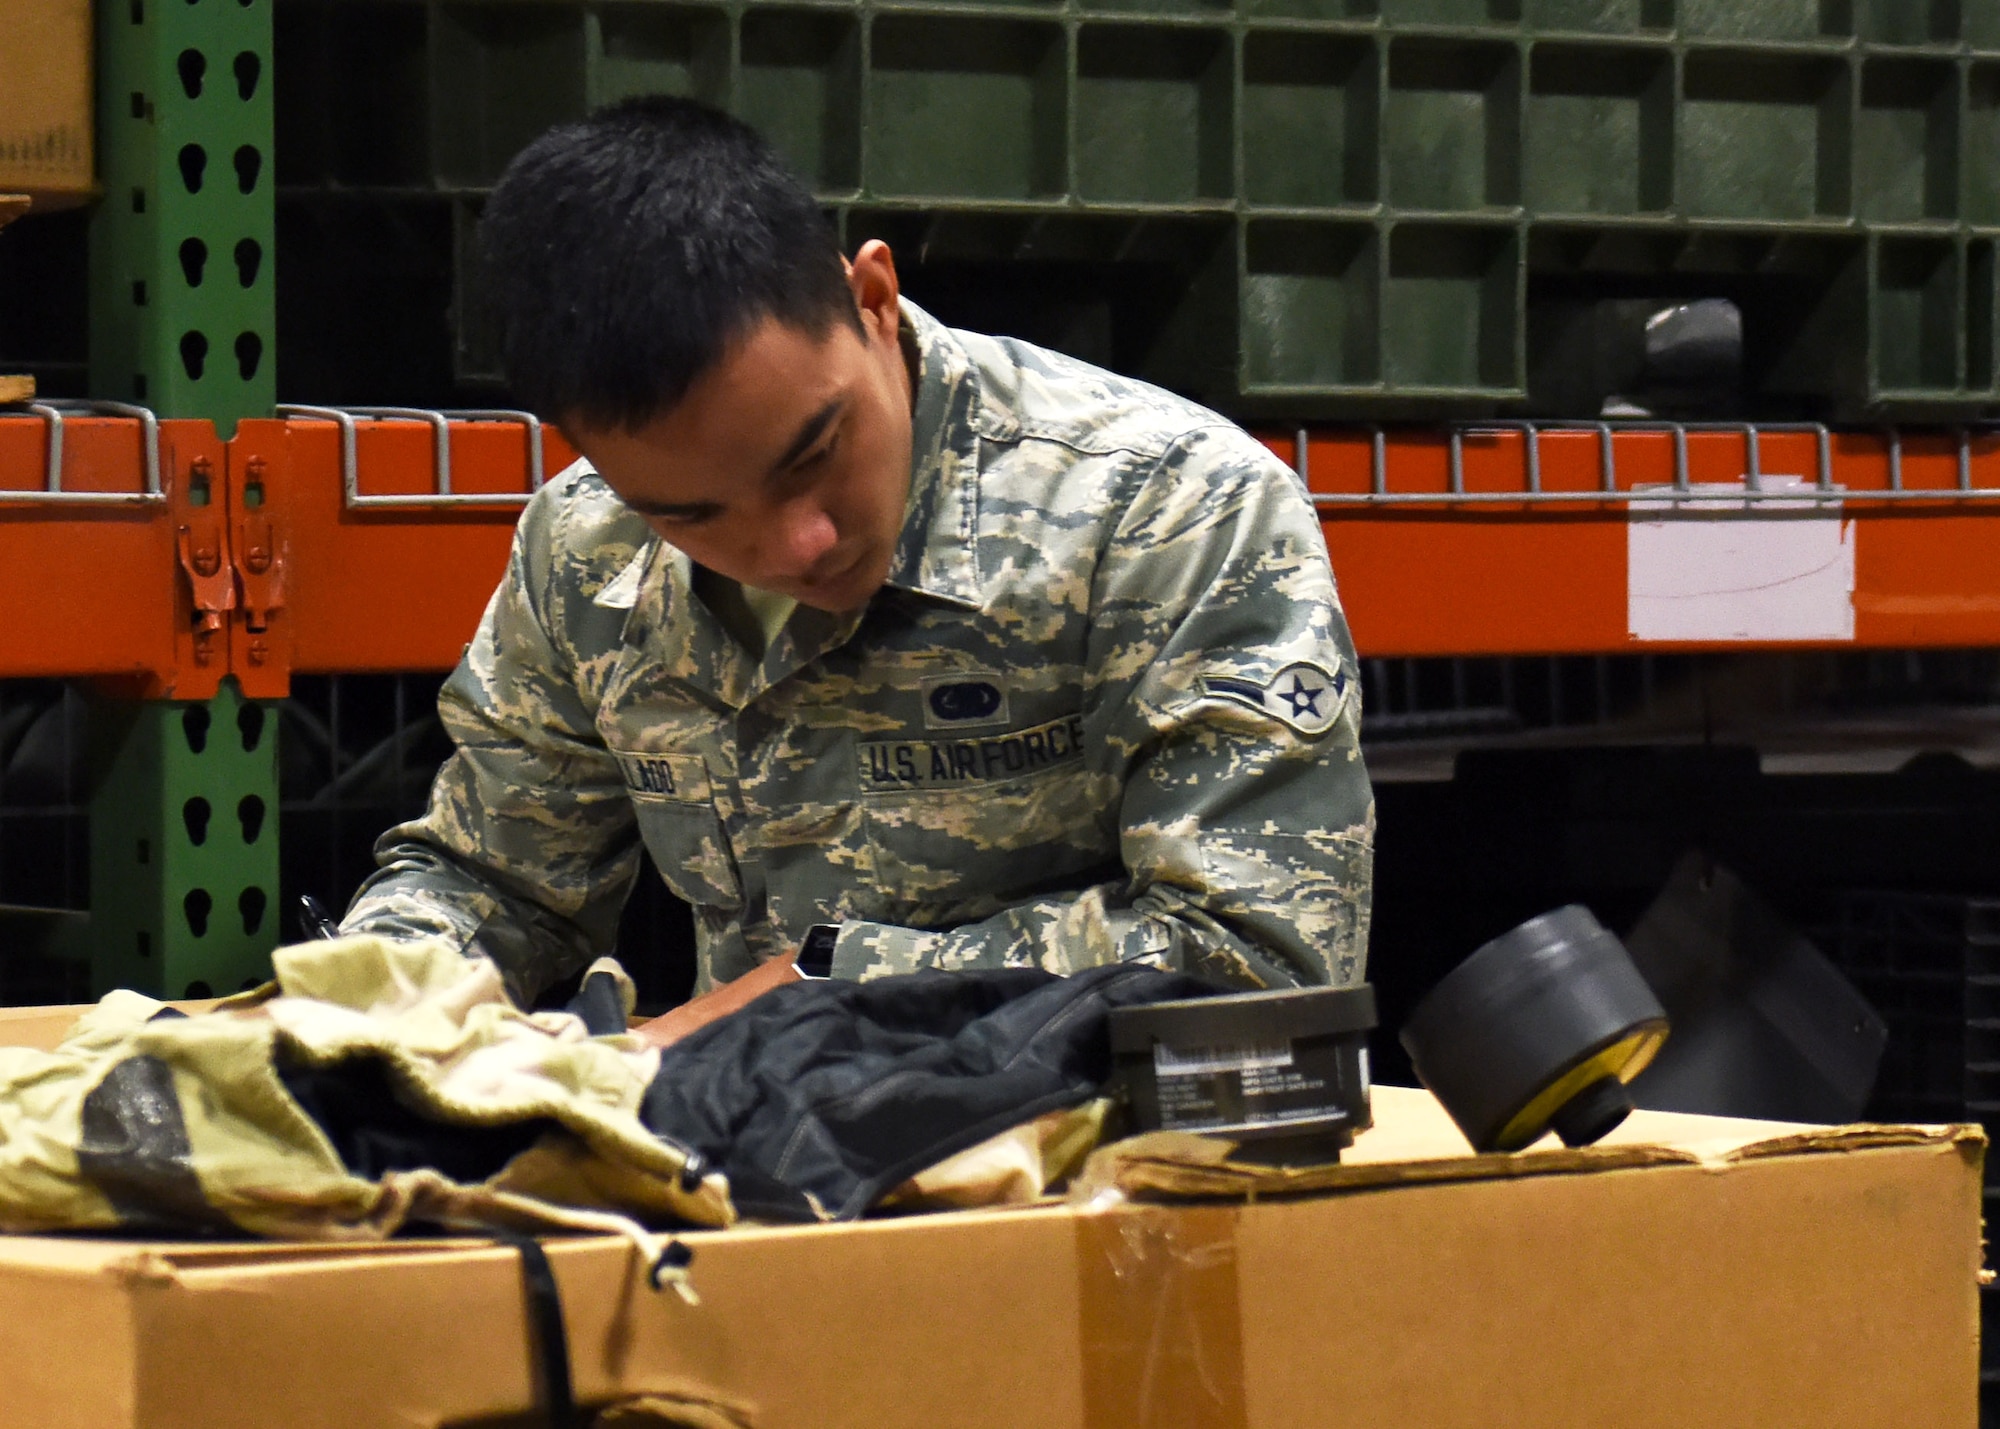 U.S. Air Force Airman Joerimer Collado, an individual protective equipment (IPE) specialist assigned to the 509th Logistics Readiness Squadron (LRS), creates an inventory list for disposition items at Whiteman Air Force Base, Mo., Jan. 17, 2017. When items are no longer needed in the IPE shop they are put into crates to be transferred to another facility. (U.S. Air Force photo by Senior Airman Danielle Quilla)